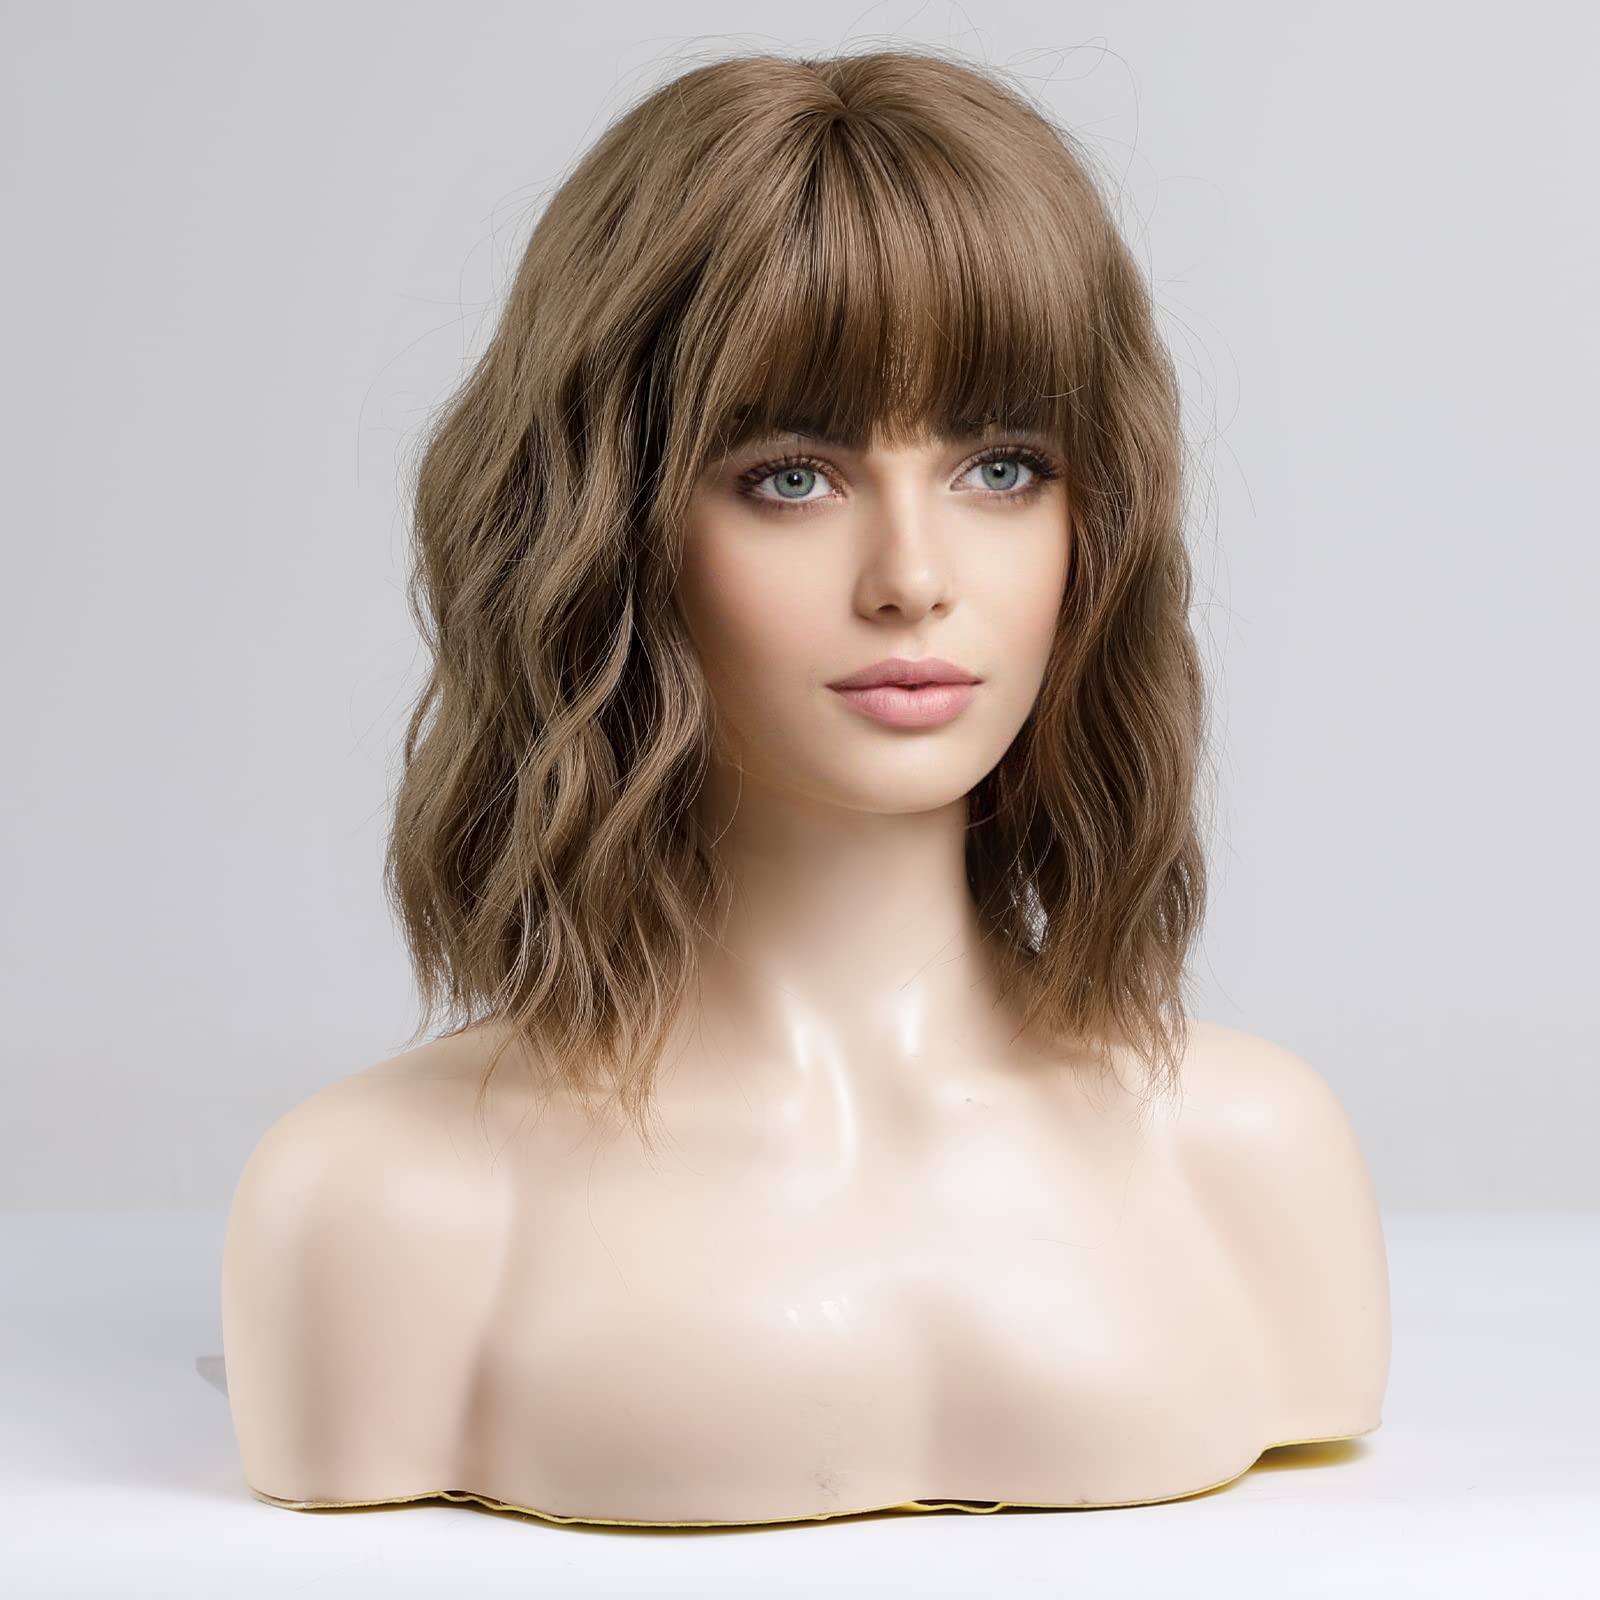 HAIRCUBE Short Brown Bob Wigs for Women Curly Hair Wig with Bangs